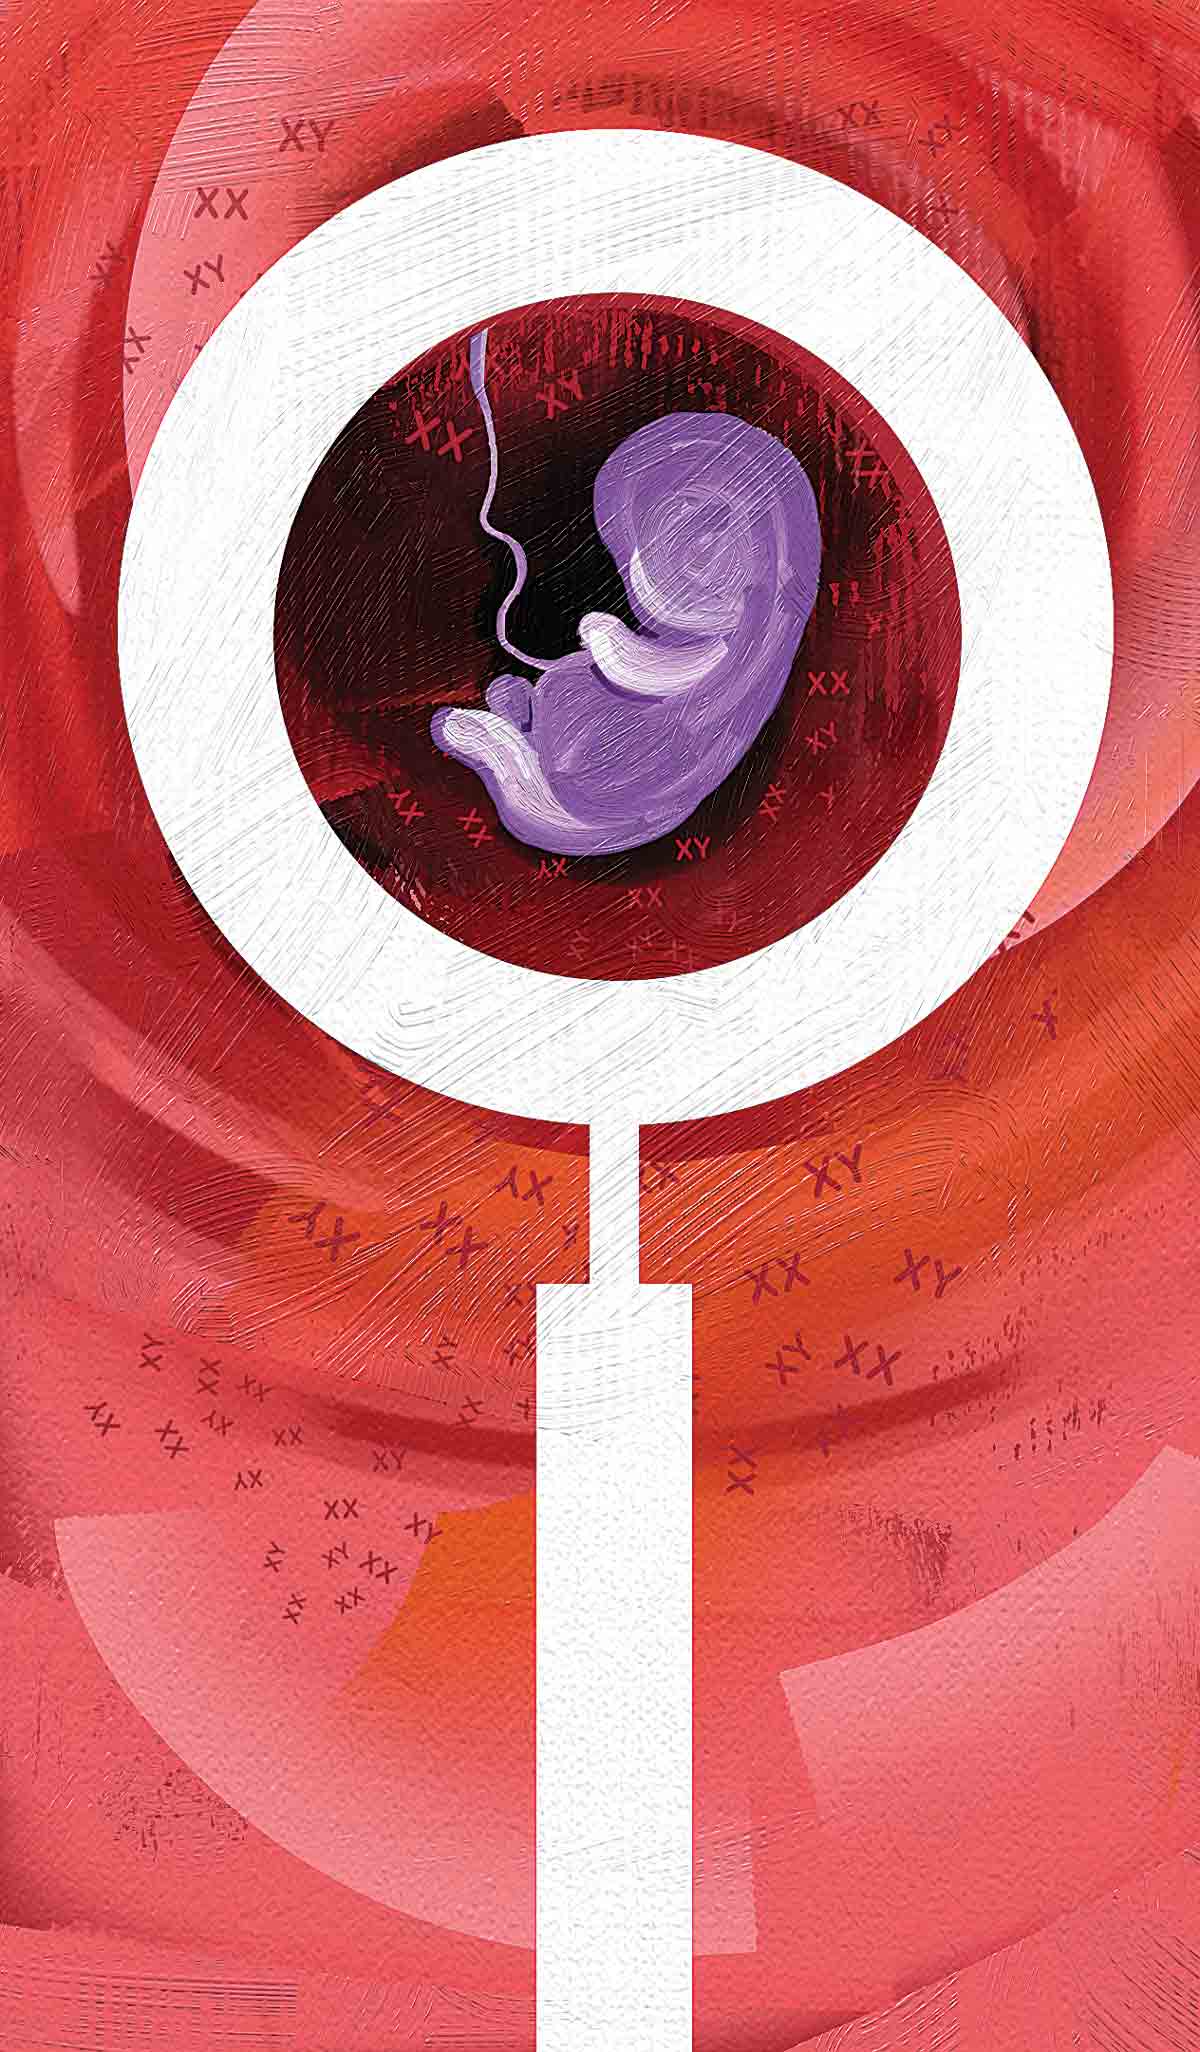 The woman and child development minister’s proposal is that the gender of the child be compulsorily registered and the birth be tracked. Activists have opposed the idea, saying it will only make female foeticide more rampant. (Illustration by: C R Sasikumar)